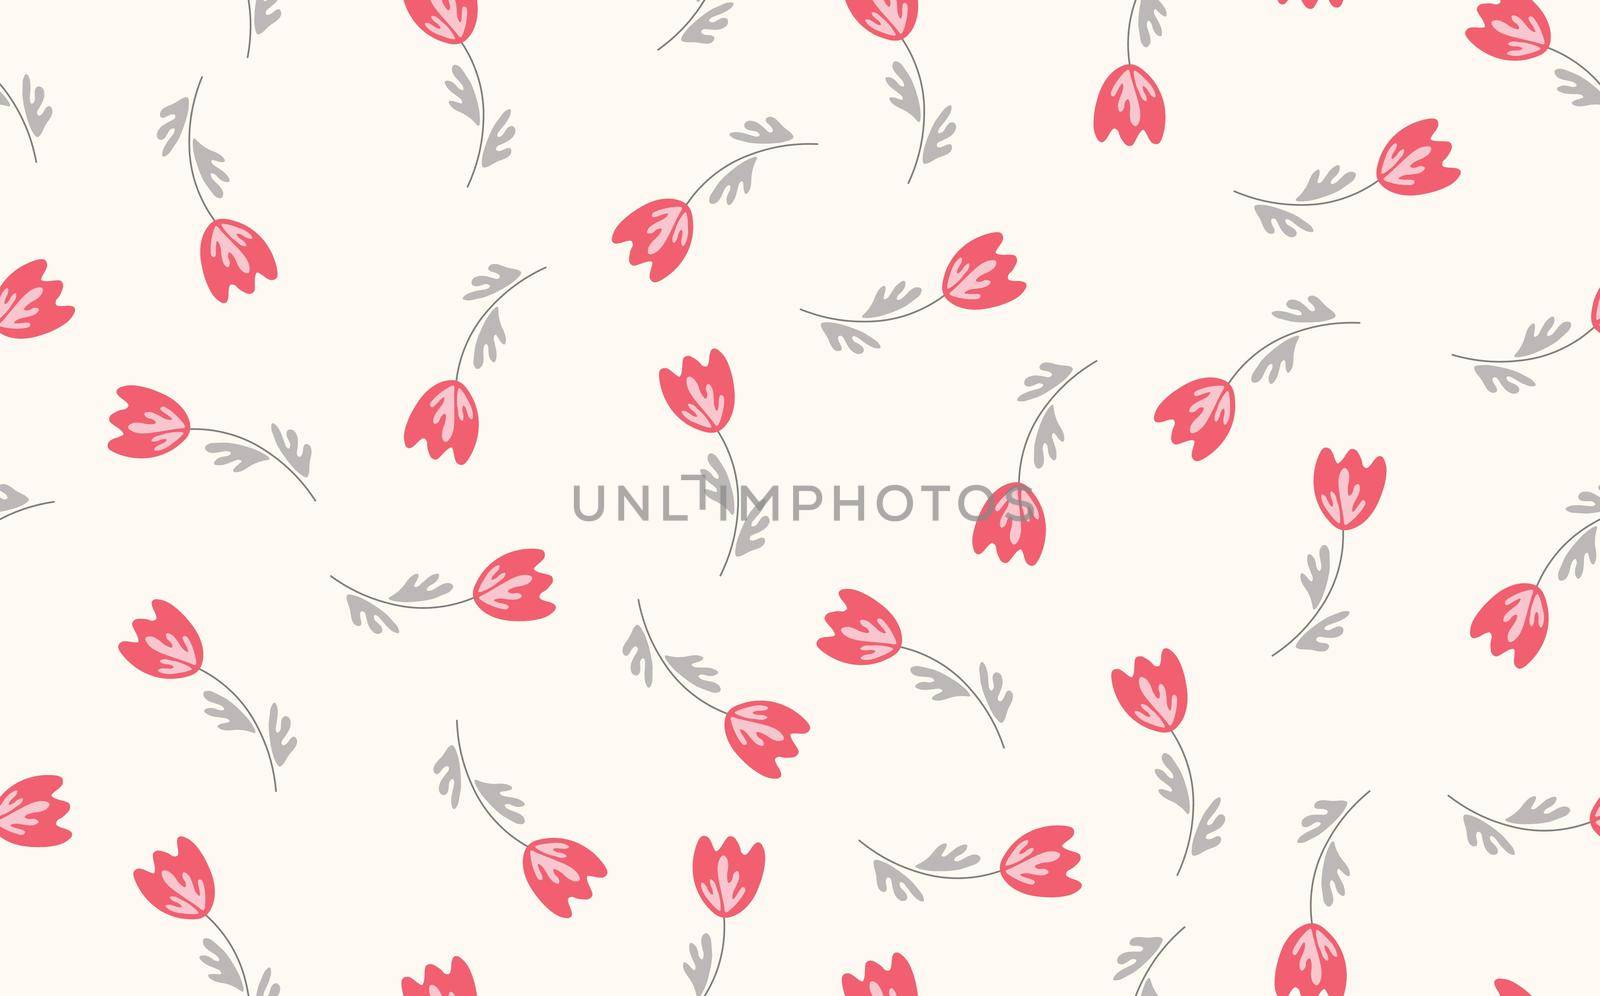 Seamless floral pattern based on traditional folk art ornaments. Colorful flowers on light background. Scandinavian style. Sweden nordic style. Vector illustration. Simple minimalistic pattern by allaku